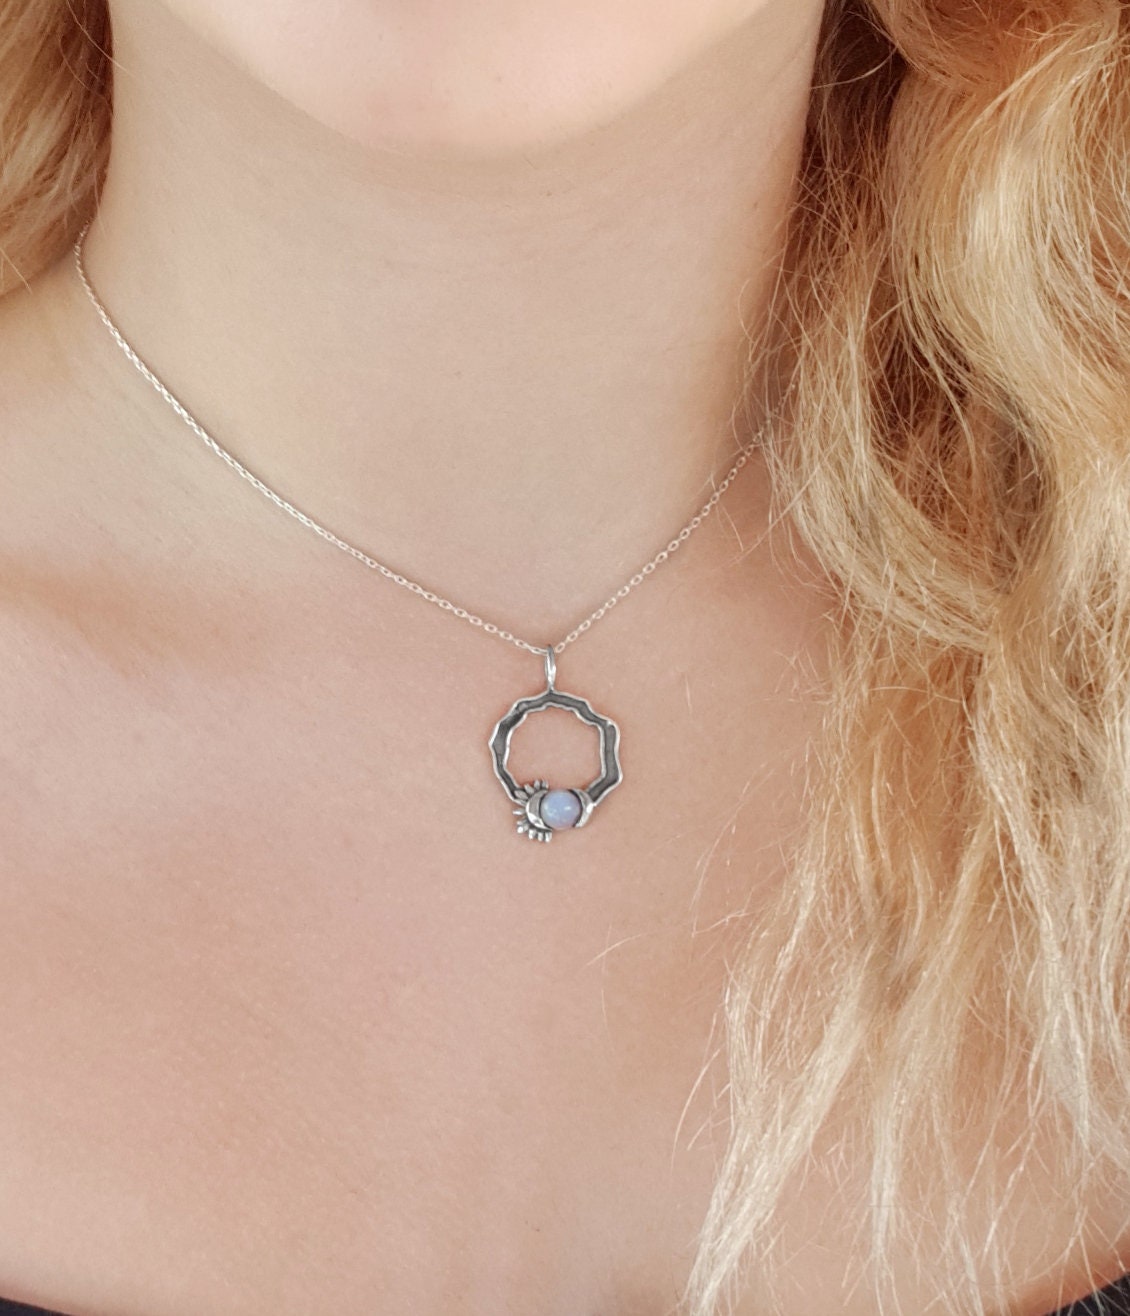 Sun And Moon Necklace, Crescent Moon Necklace, Rainbow Moonstone, Fine 925 Sterling Silver Birthstone Necklace With Chain